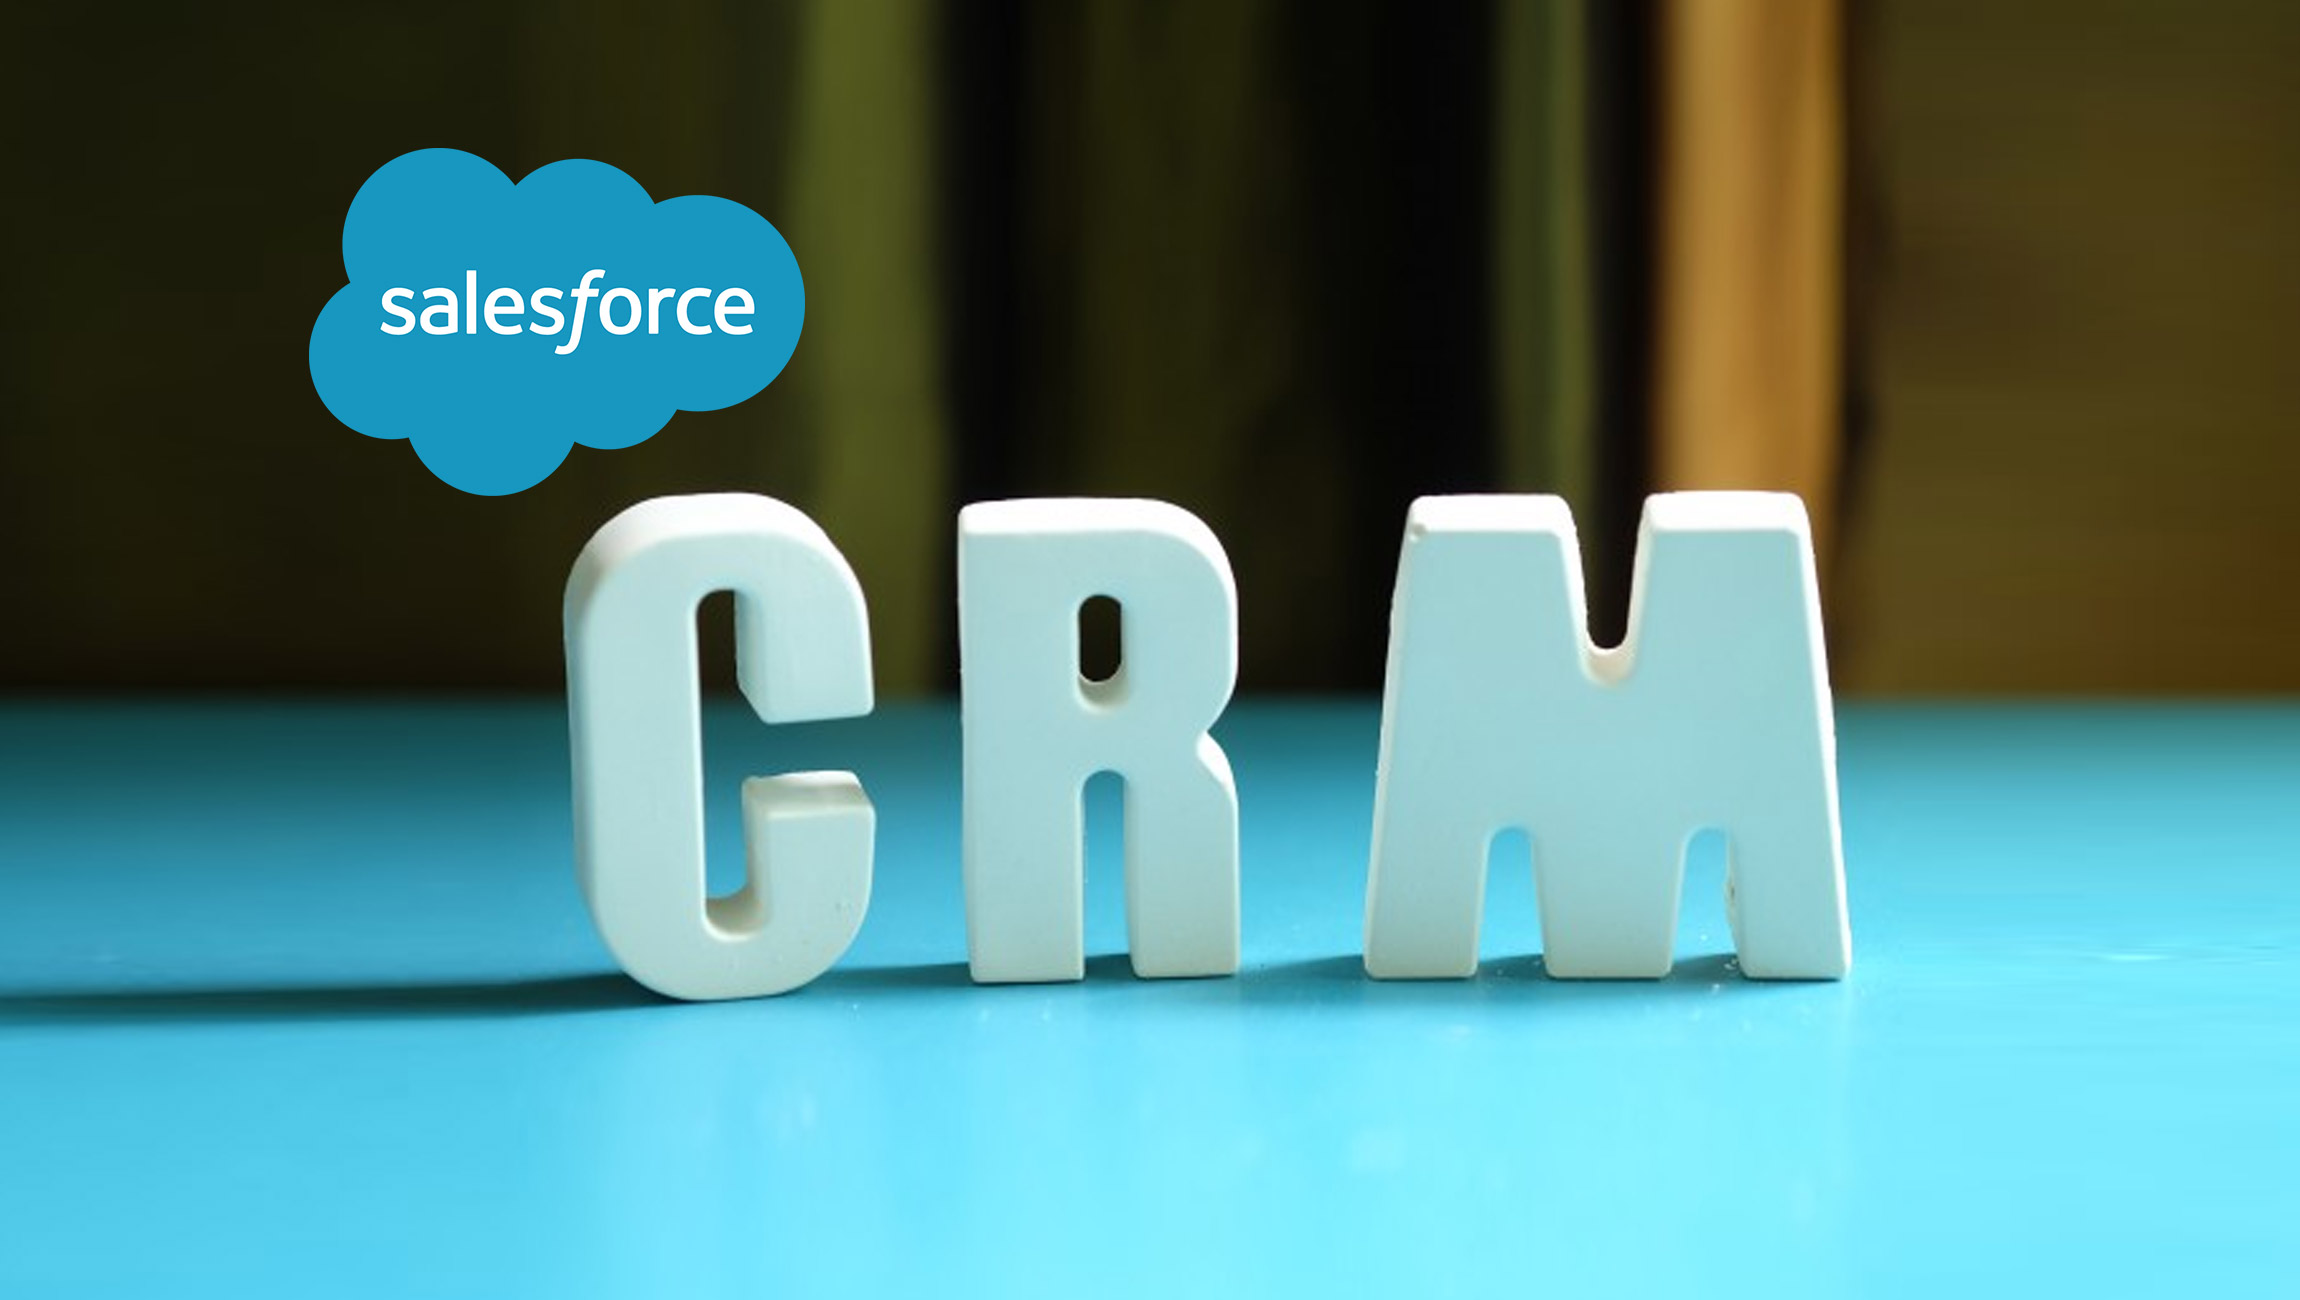 Salesforce Positioned As A Leader In 2019 Gartner Magic Quadrant For CRM Lead Management